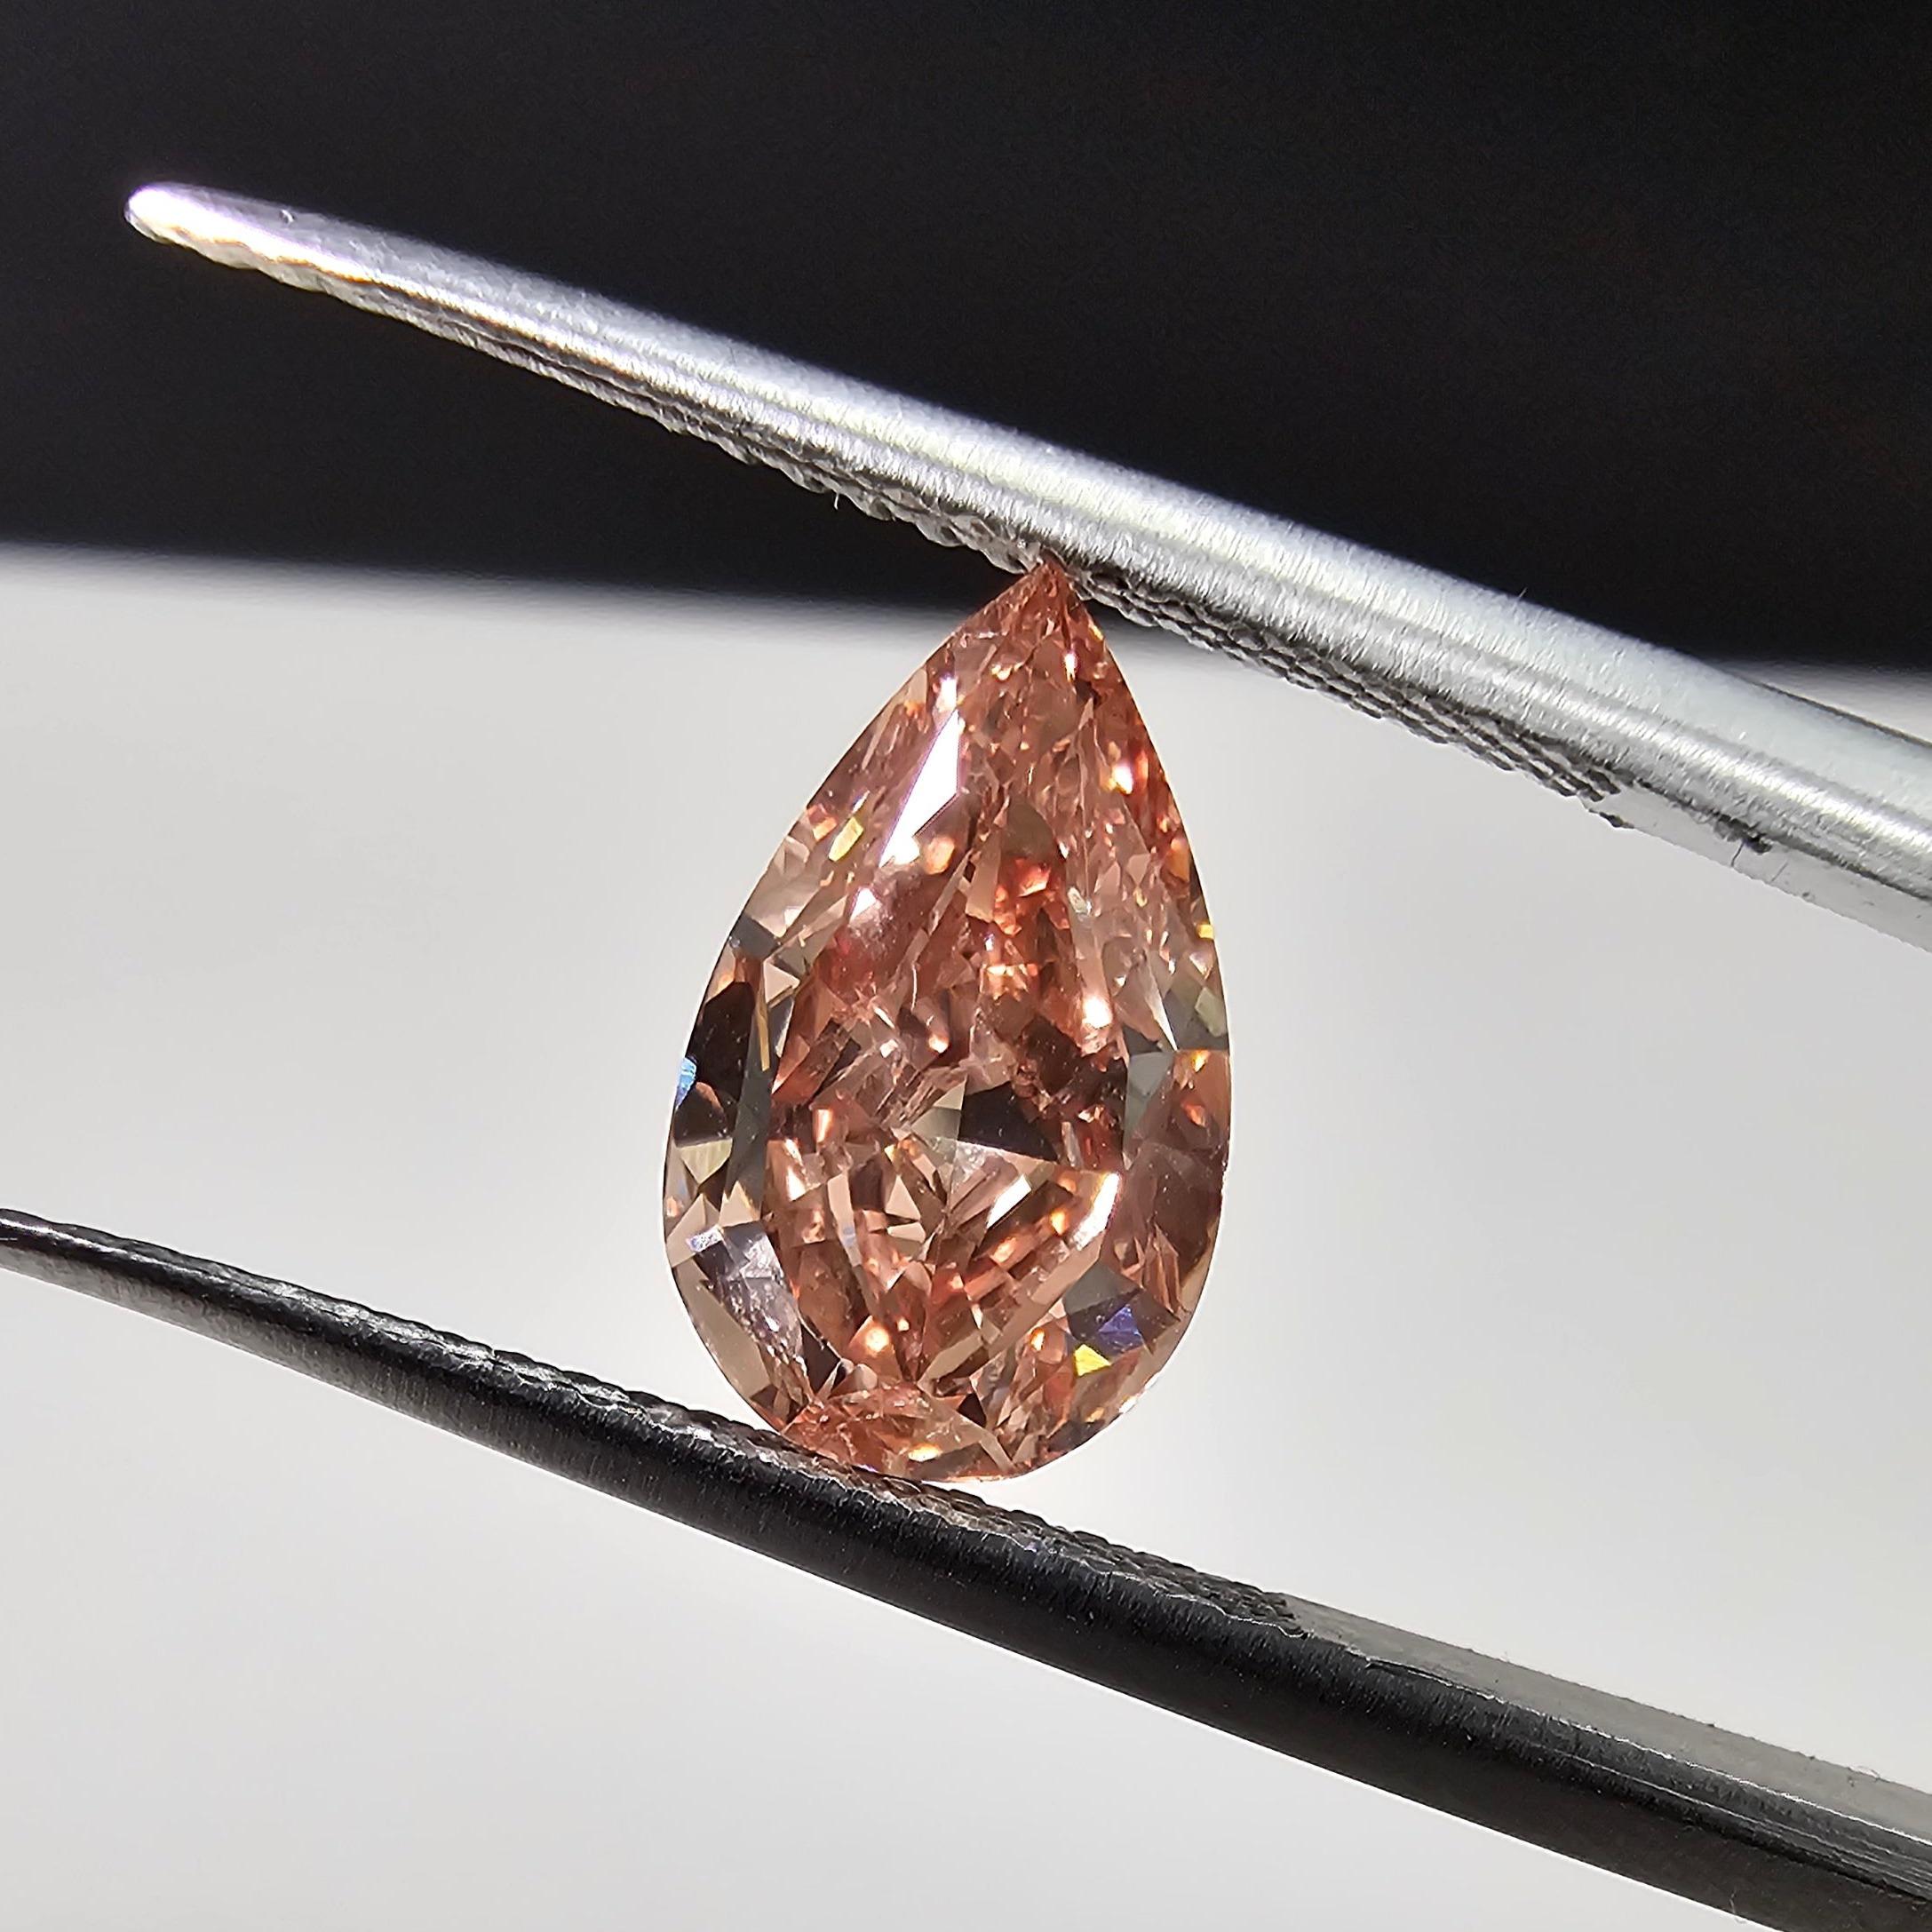 2.22 Carat
Fancy Deep Brown-Pink
Pear Shape Diamond 
VS2 Clarity 
Very Good, Good Cutting
No Fluorescence
No fluorescence
GIA Certified Diamond 

This piece can be viewed before purchase in our showroom in NYC, or at one of our retail partners